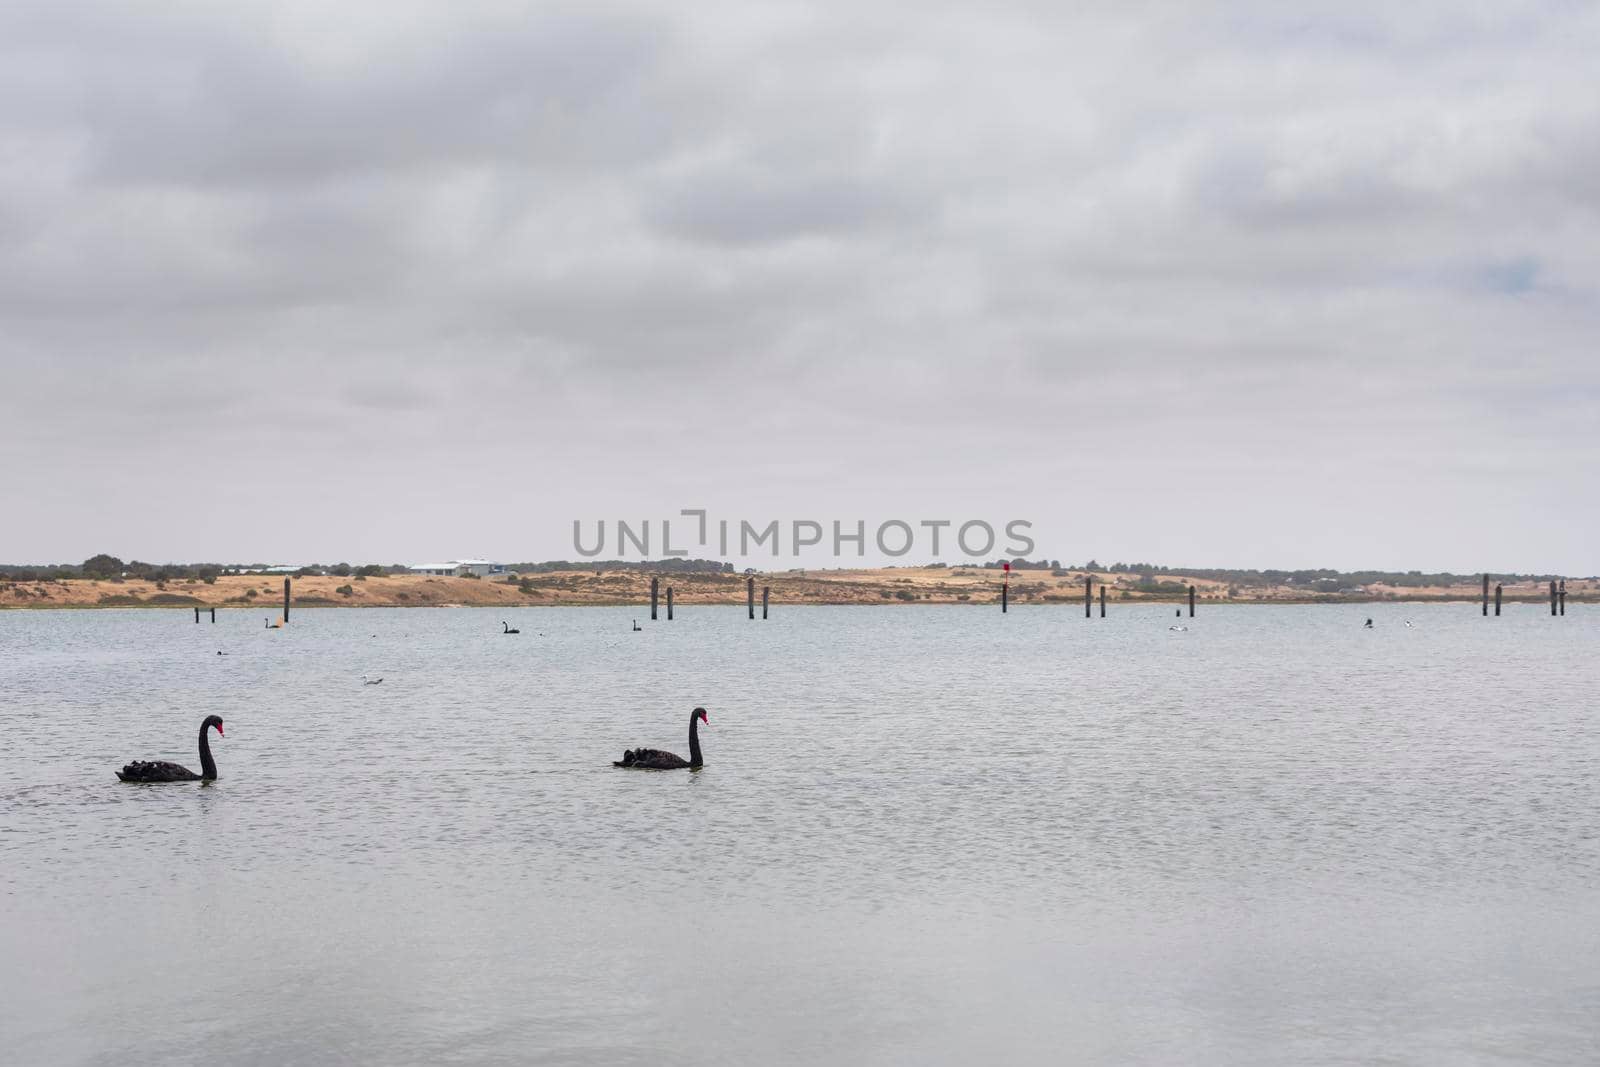 Two black swans paddling in a large estuary near the mouth of the River Murray in Goolwa by WittkePhotos